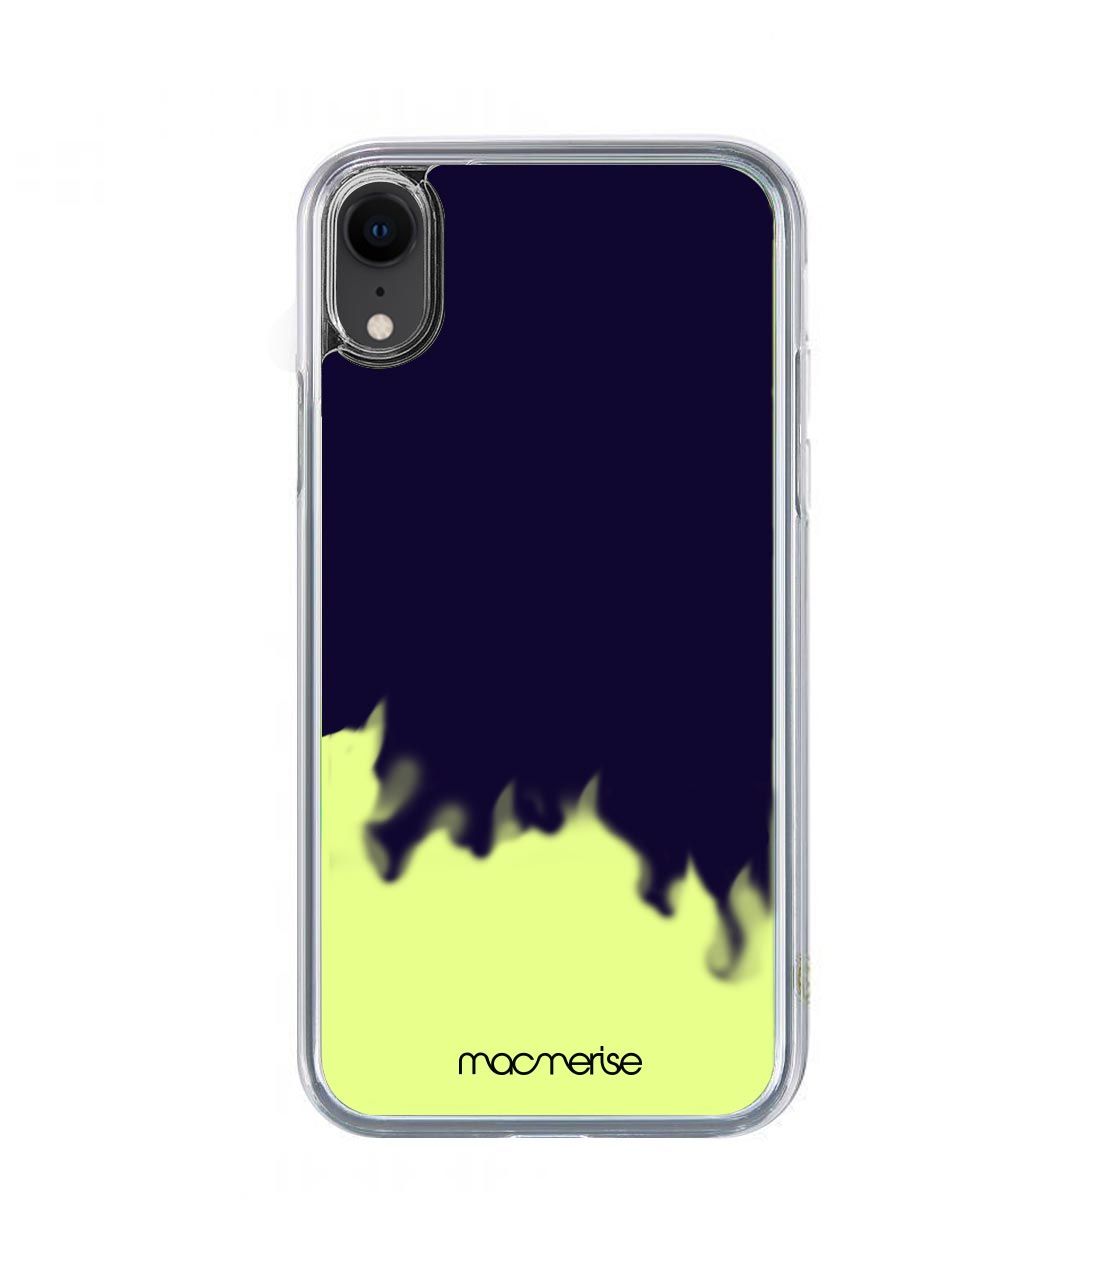 Neon Sand Blue - Neon Sand Phone Case for iPhone XR